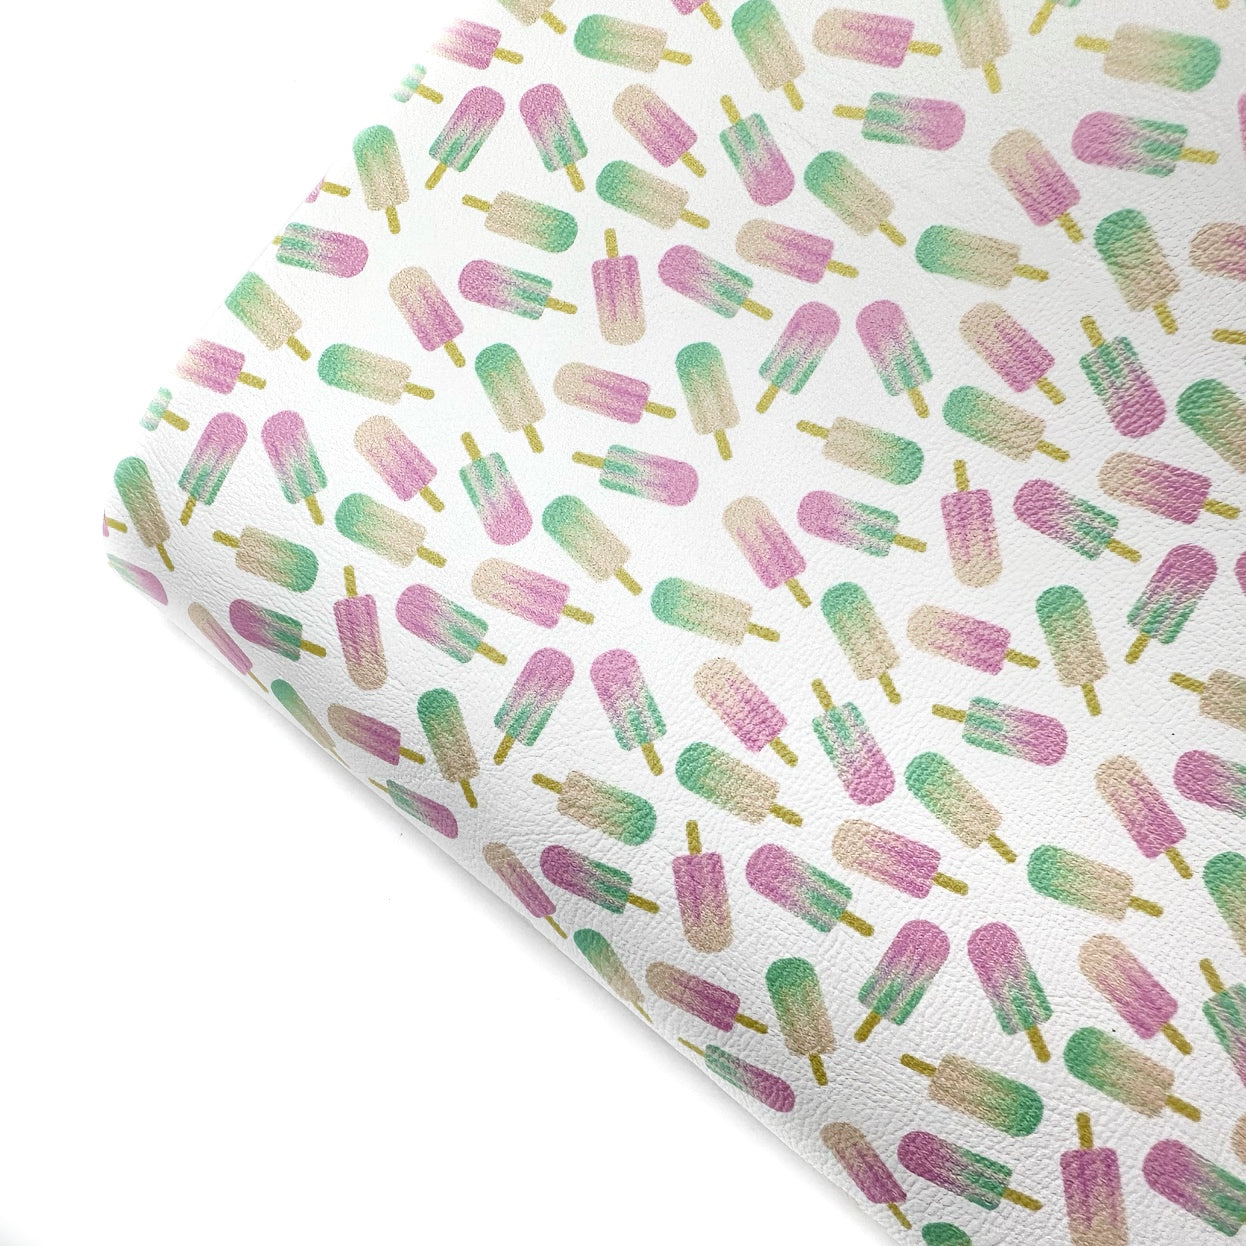 Pastel Lolly Ice Premium Faux Leather Fabric Sheets